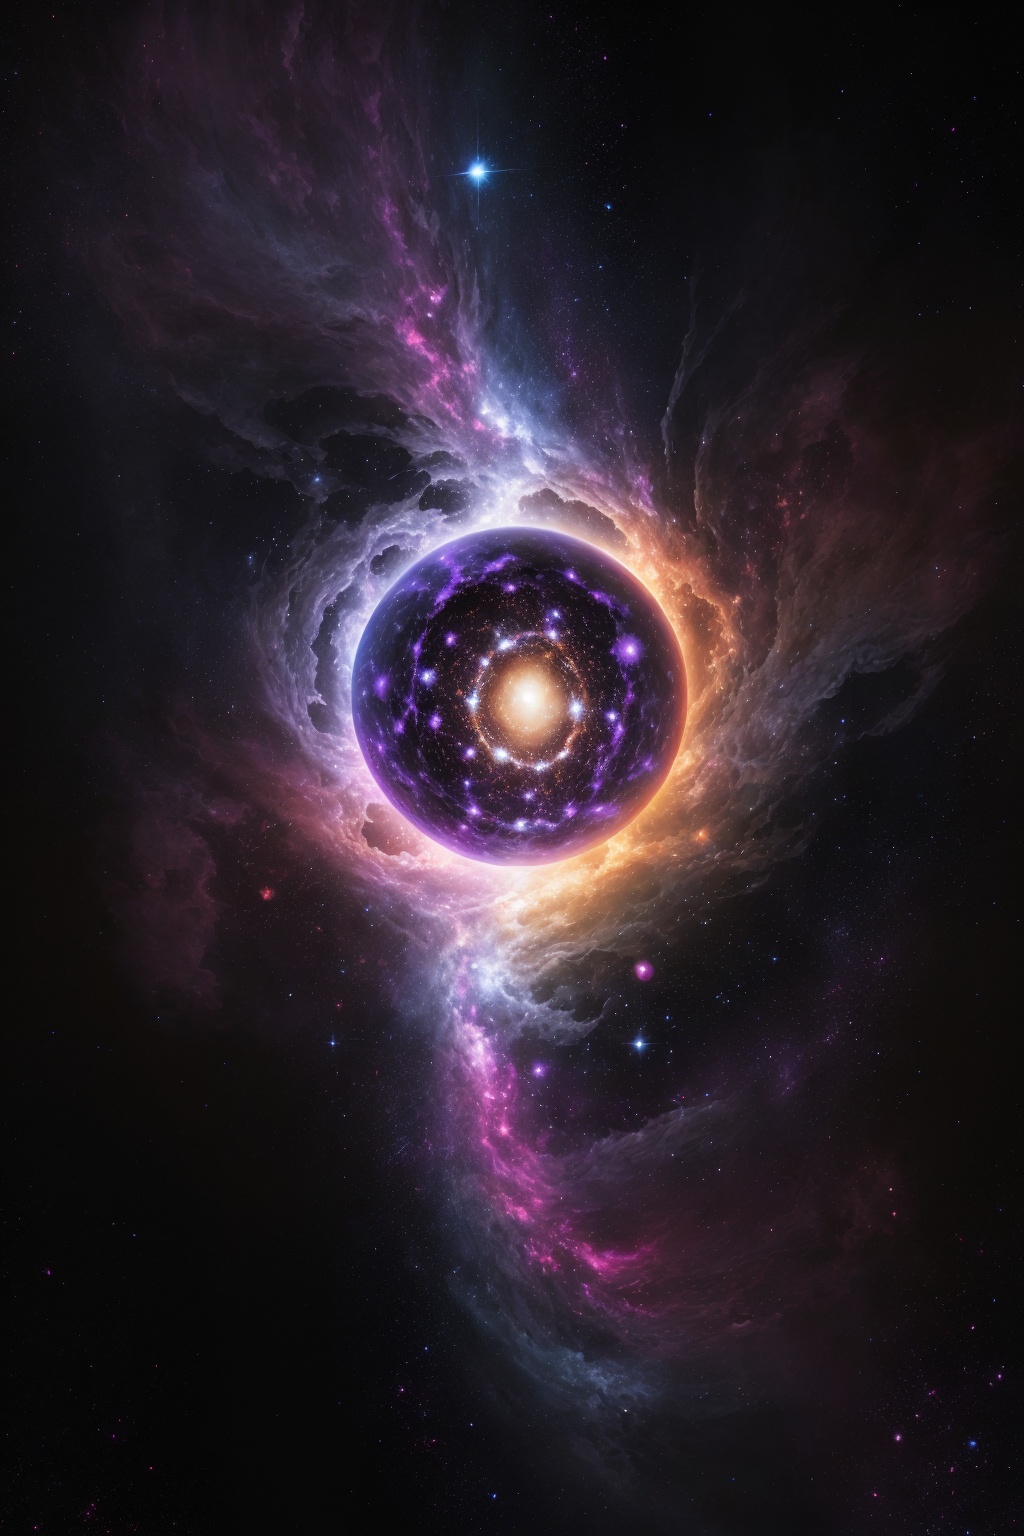 (Best quality, ultra-high resolution, high detail:1.2),A planet-**** object floating in an abstract nebula,galaxy and stars. The planet is surrounded by swirling purple,blue and white fluid art,creating a spherical hallucination effect. The background is the dark universe,forming a high contrast with the bright colors. The surface of the planet is smooth,with a glossy sheen,delicate textures,edge lighting highlights its dynamic characteristics. The whole picture is filled with thoughts and imaginations about the universe and life. High-definition,high-quality image,intricate,sharp focus,photorealistic painting art by midjourney., <lora:20240522-1716361934931:0.6>